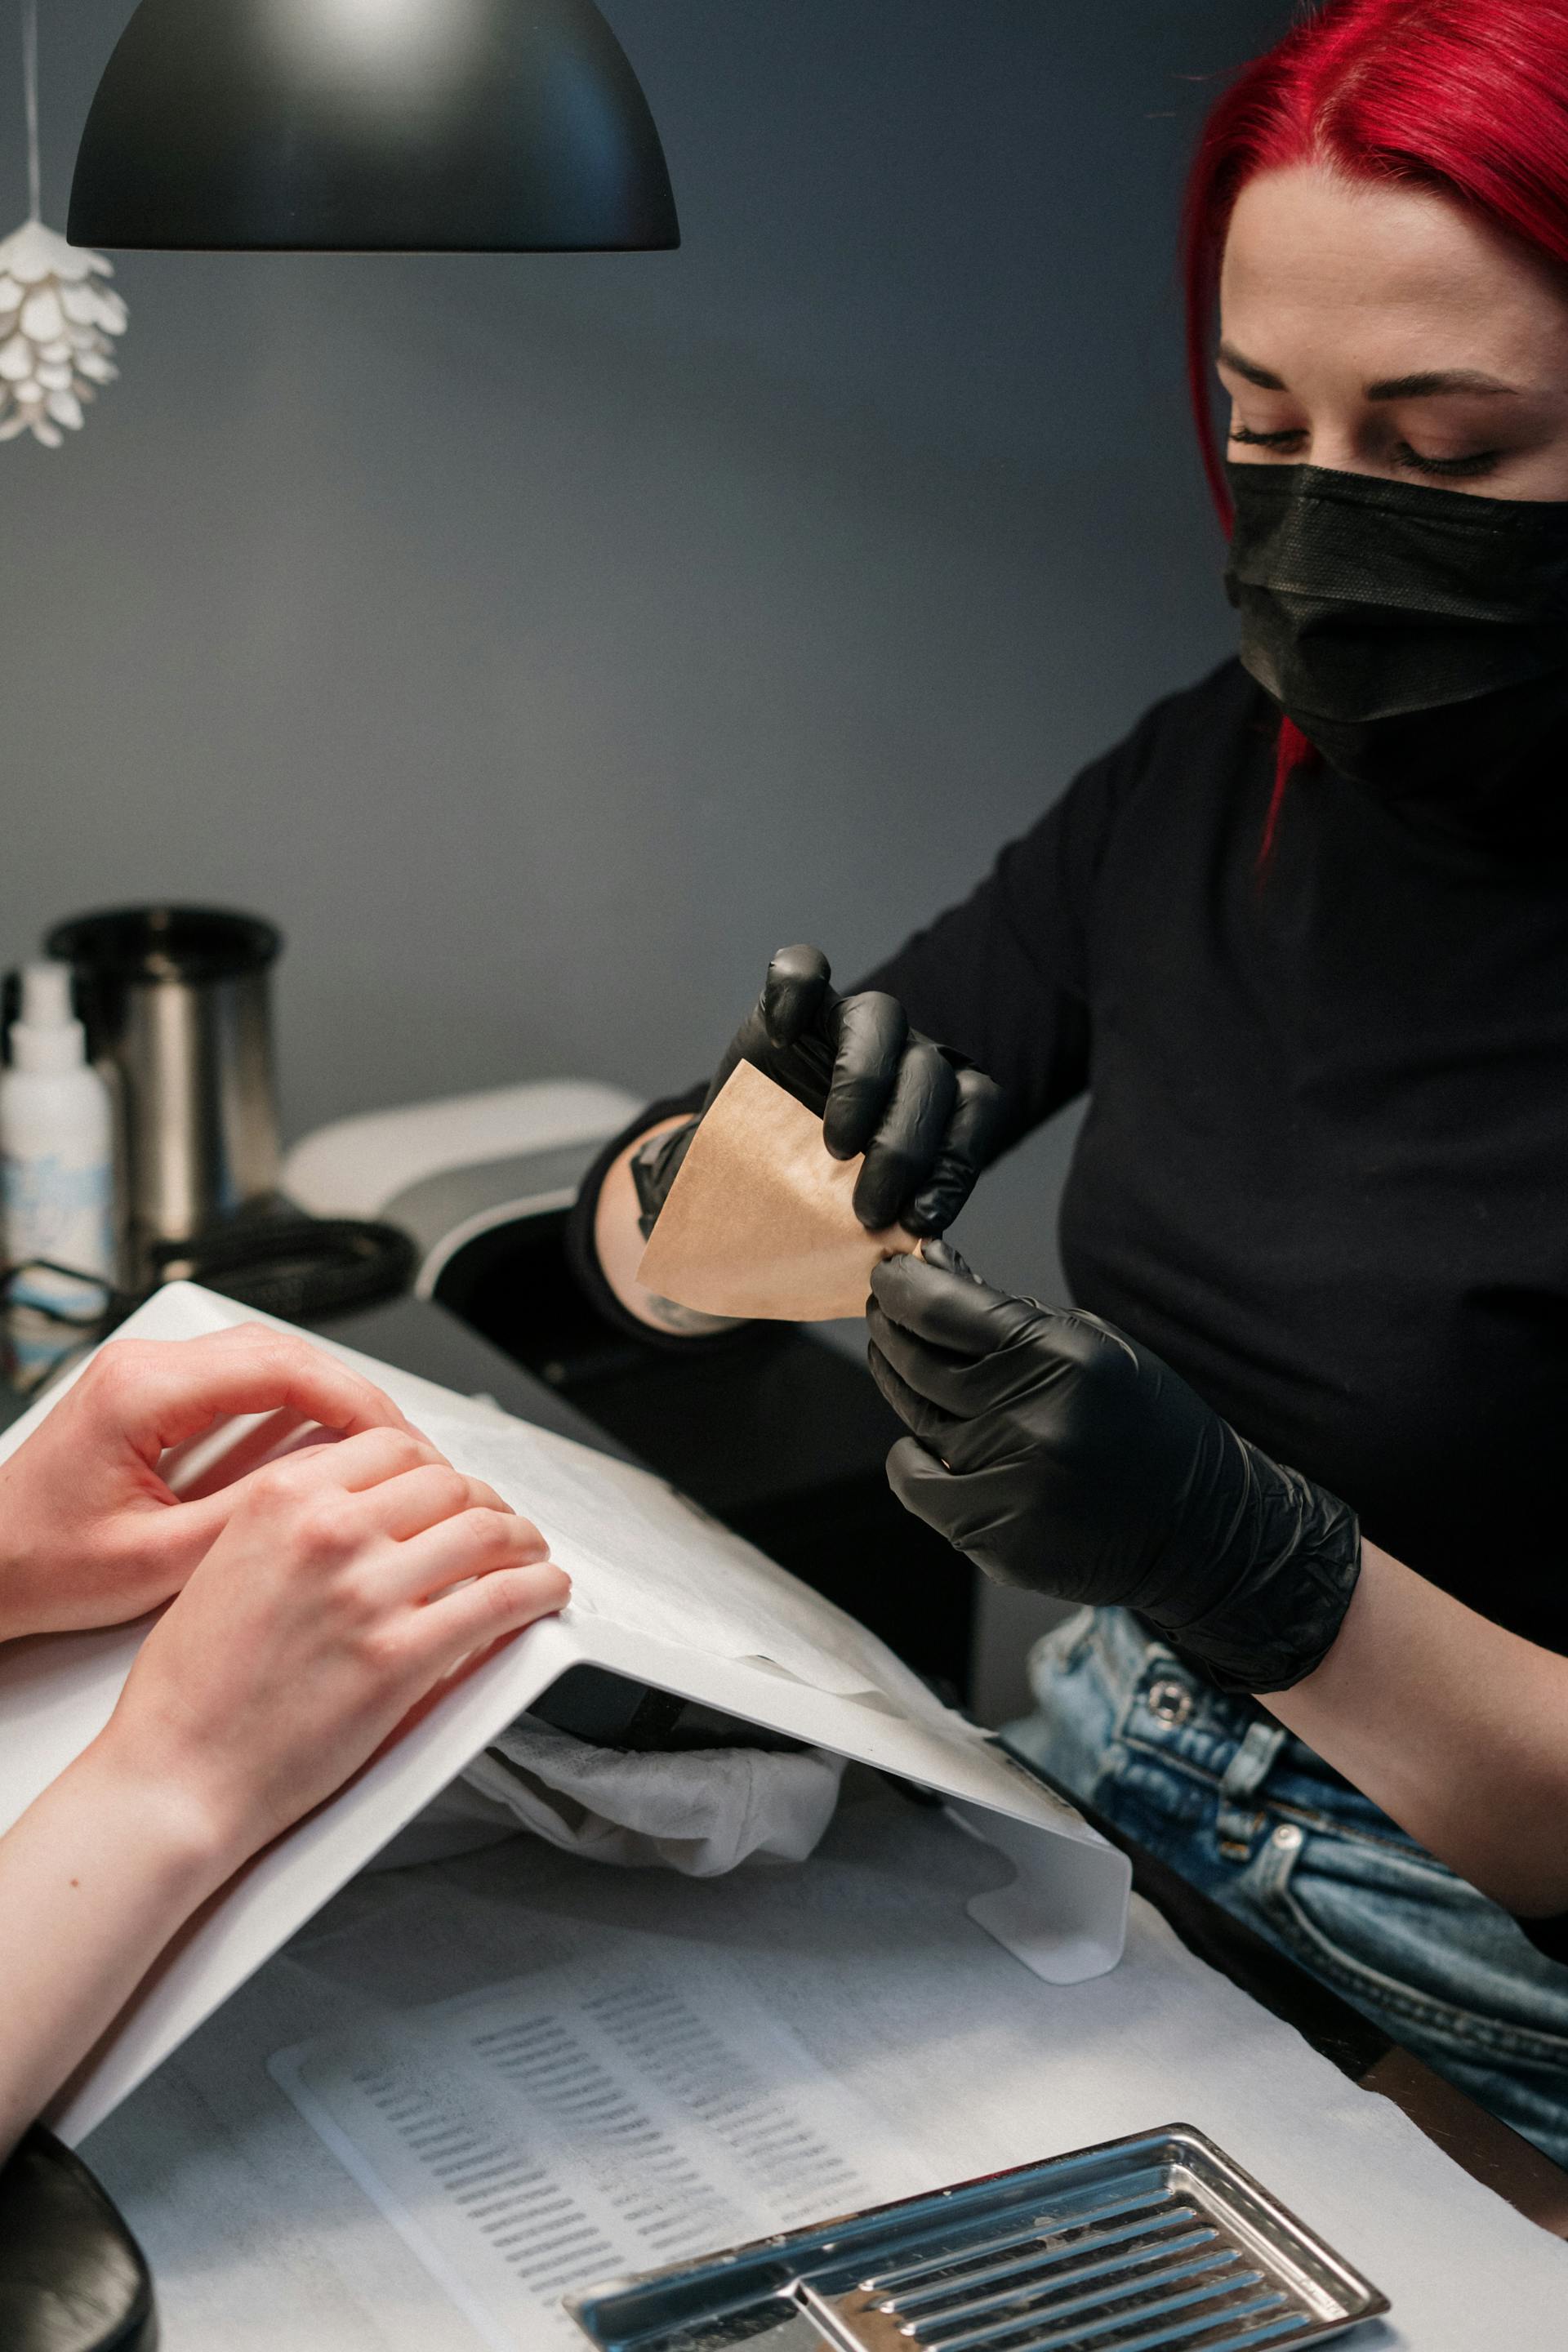 A person getting their nails done | Source: Pexels